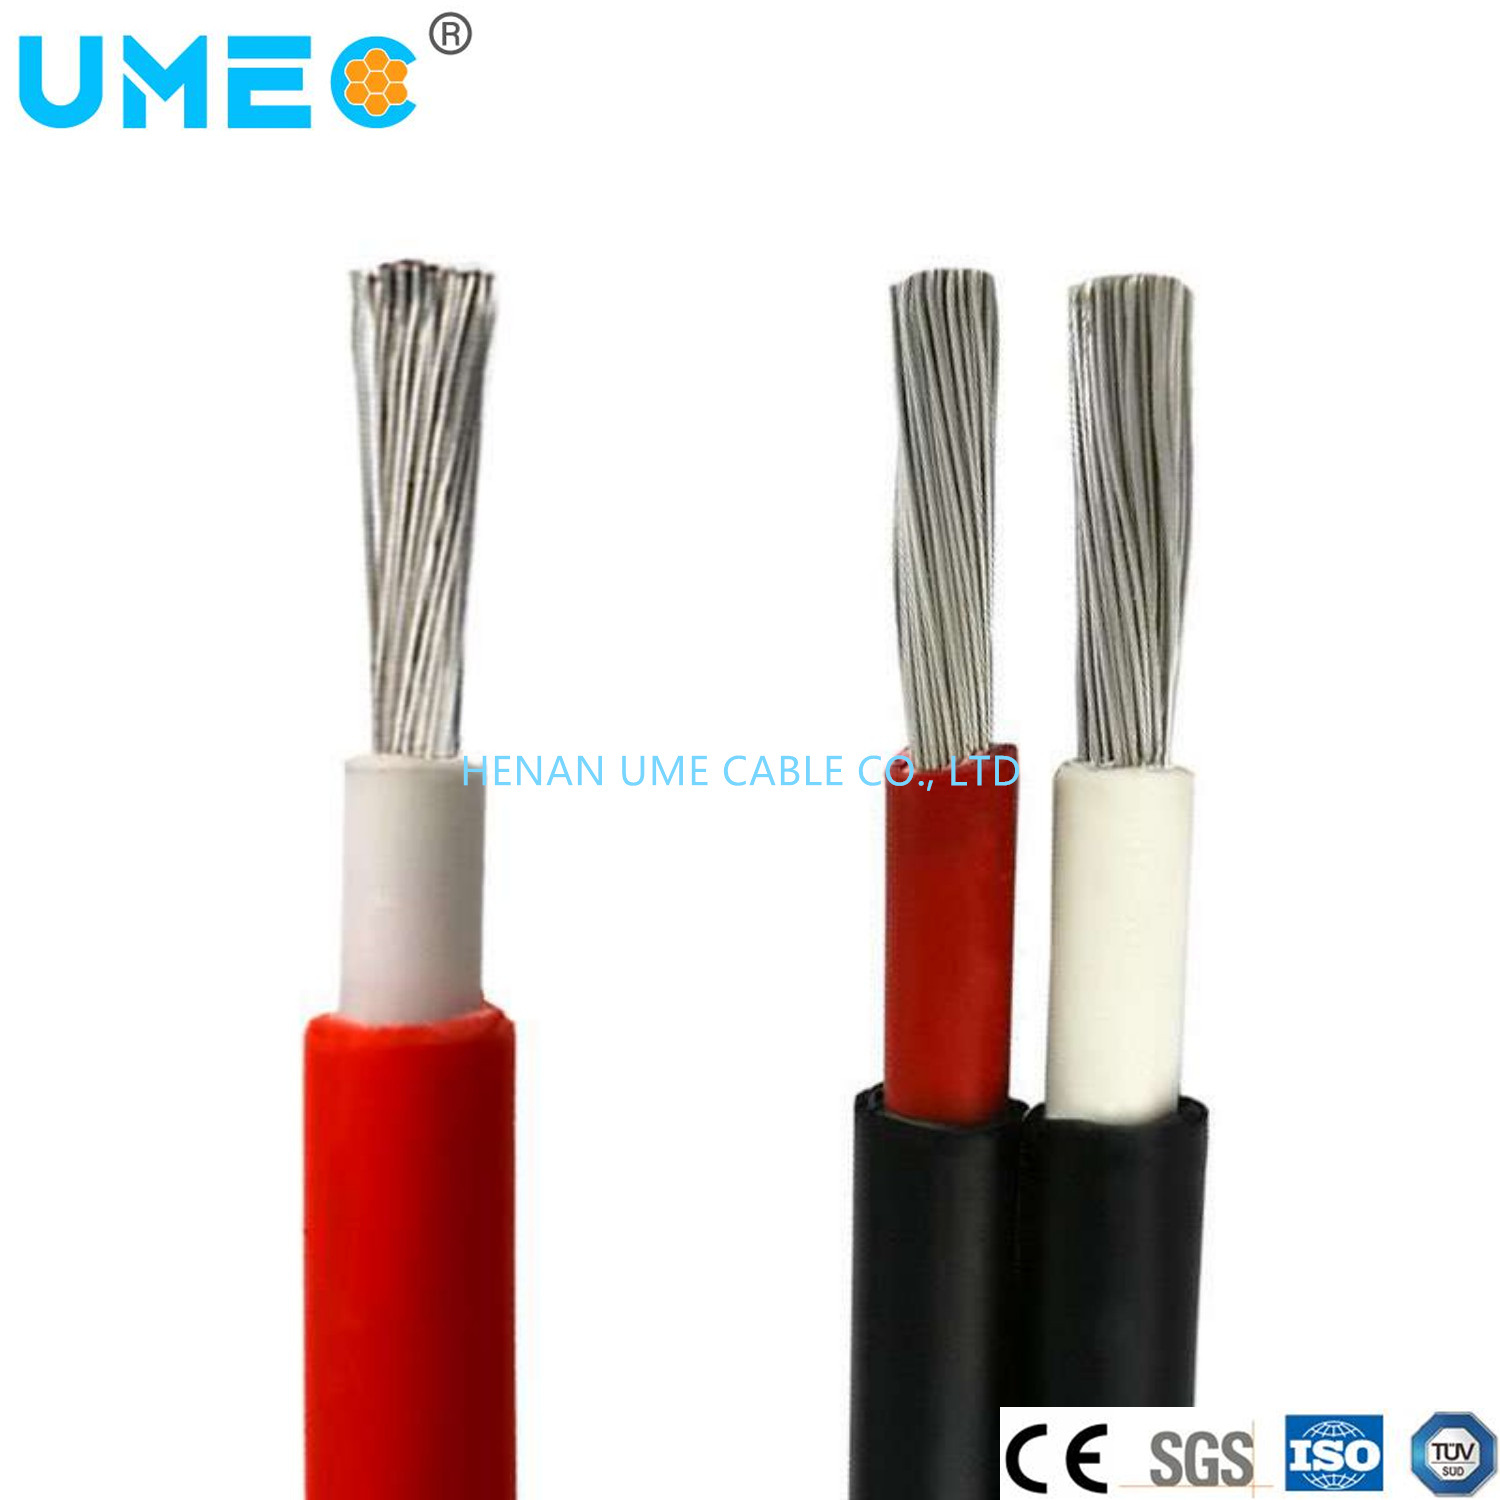 Flexible Tinned Copper Solar Panel Cables 10mm2 6mm2 Electrical Solar Cable Solar Wire PV1-F